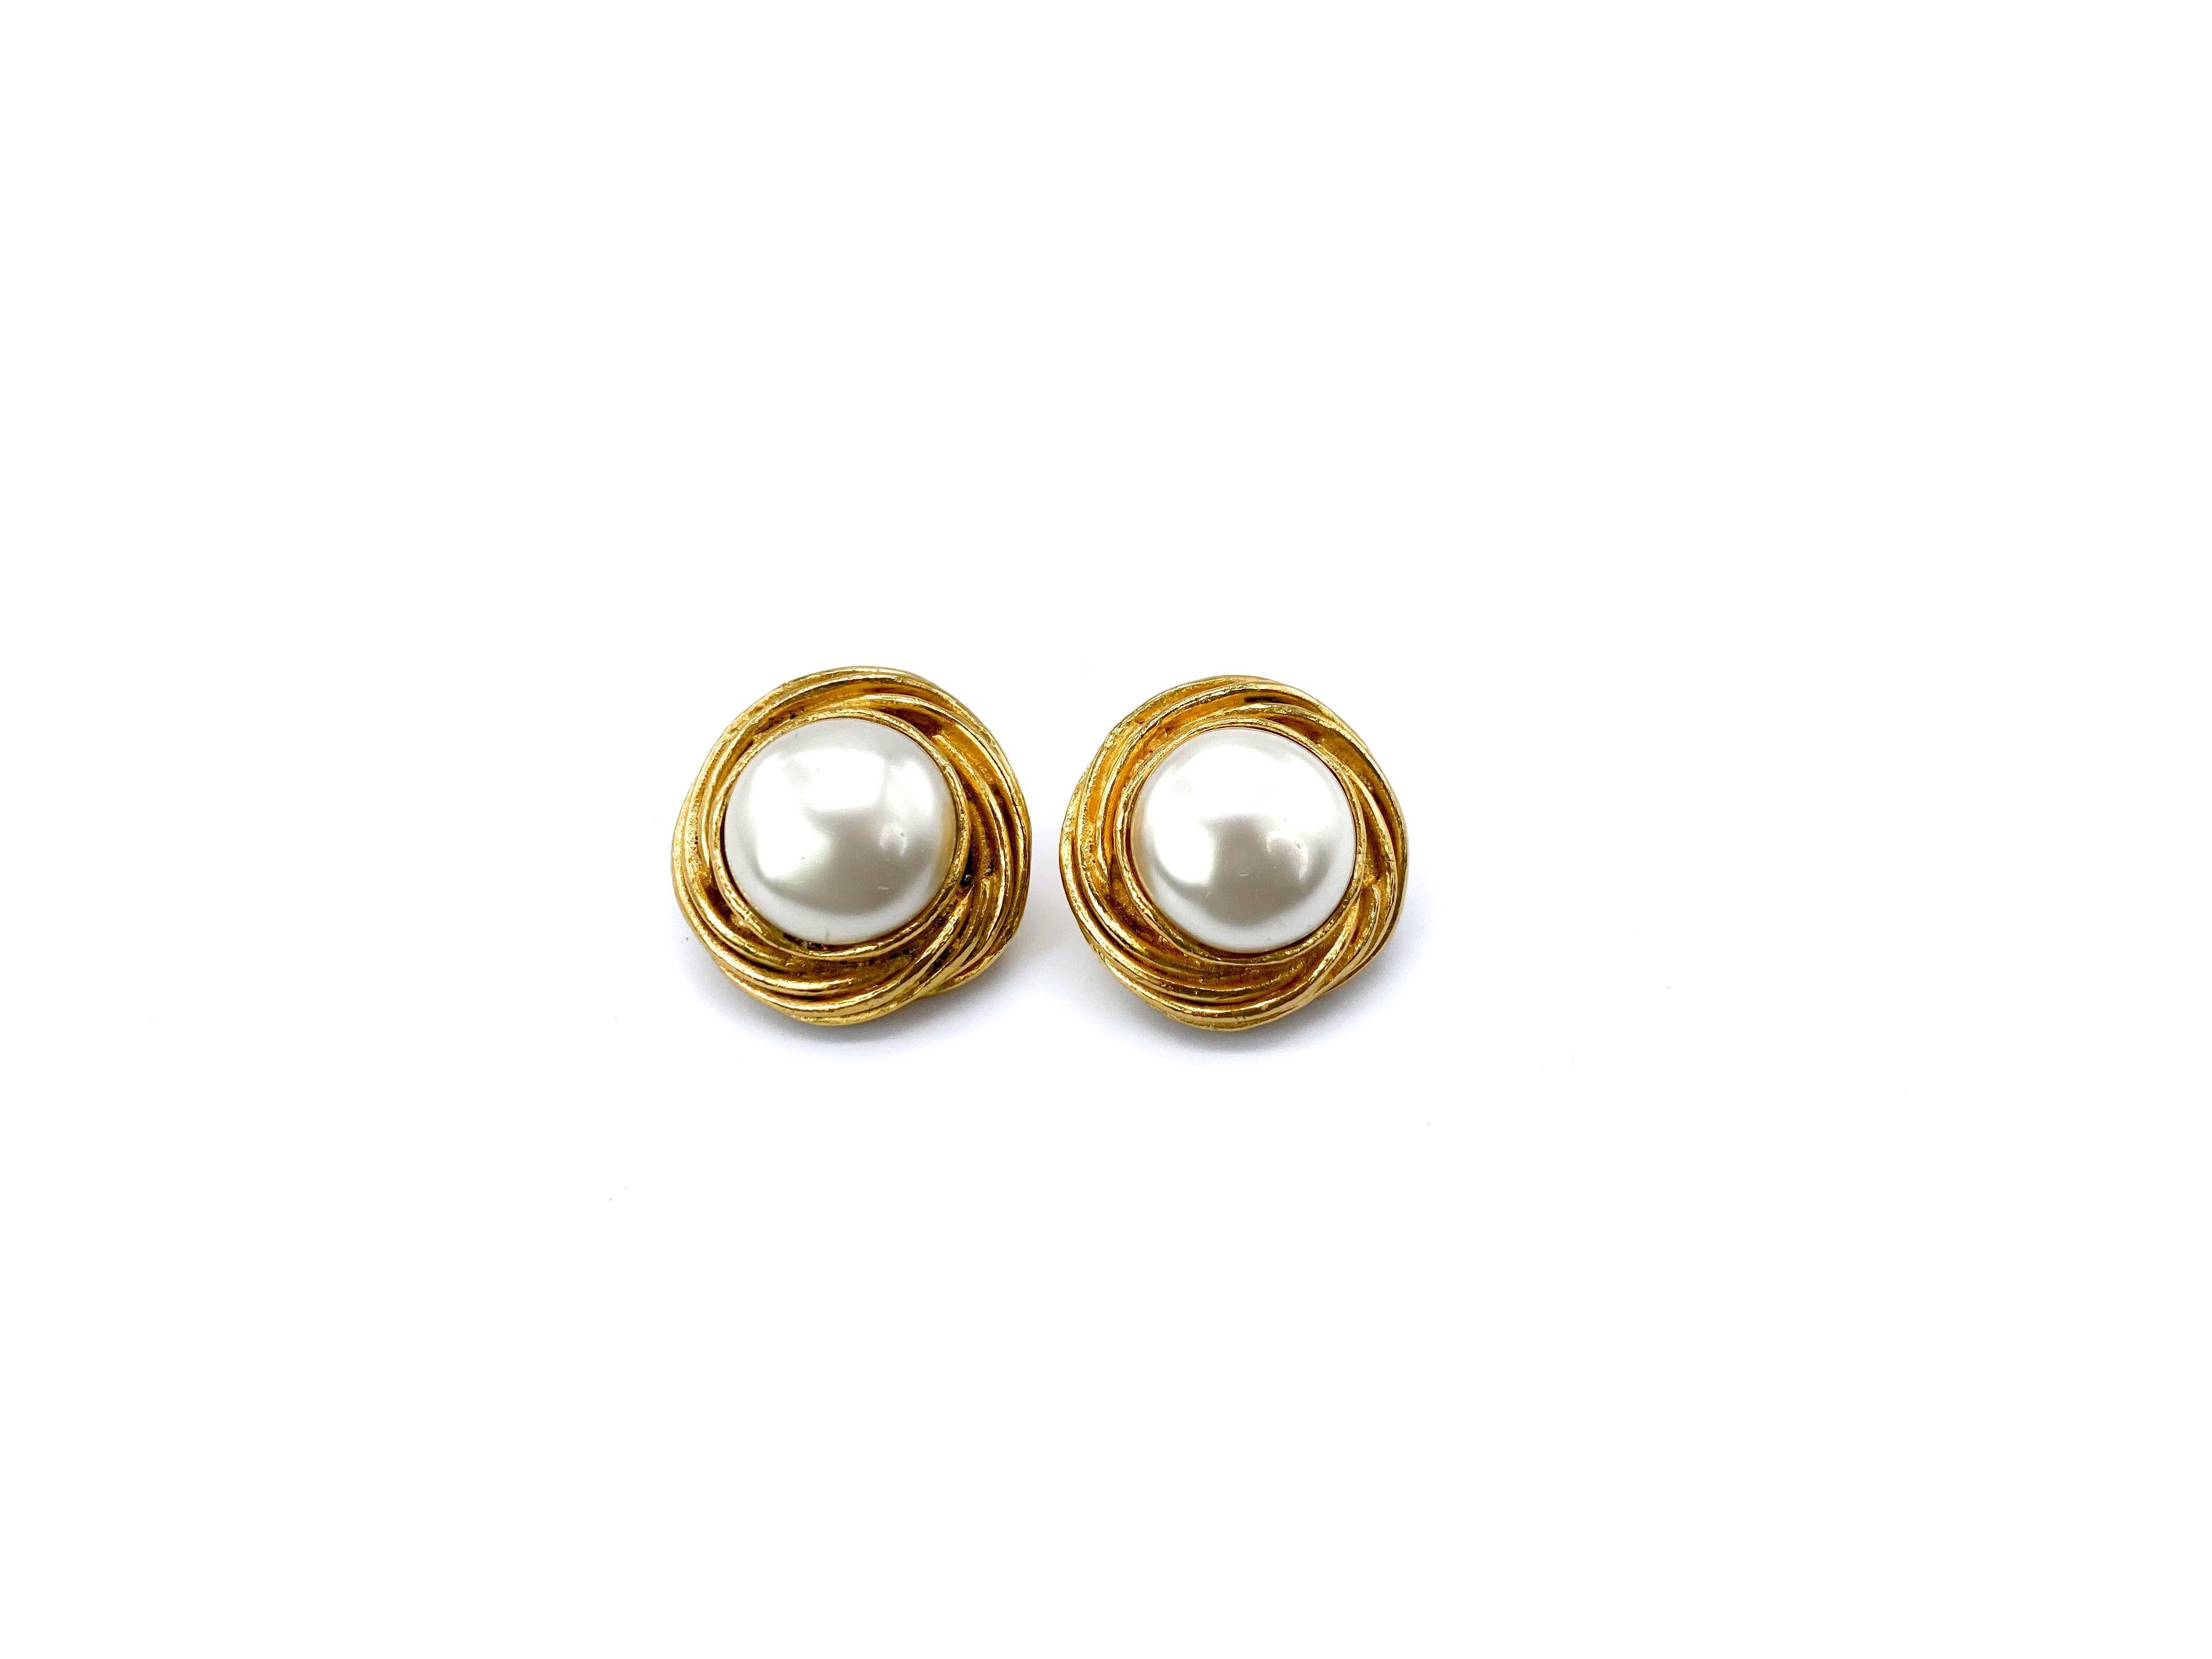 Chanel 1970s Vintage Clip On Earrings 

Timelessly elegant vintage earrings from the house of chanel, still the most desirable fashion brand in the world.  

Detail
-Cast from high quality gold plated metal 
-Set with shiny faux baroque pearls
-Made